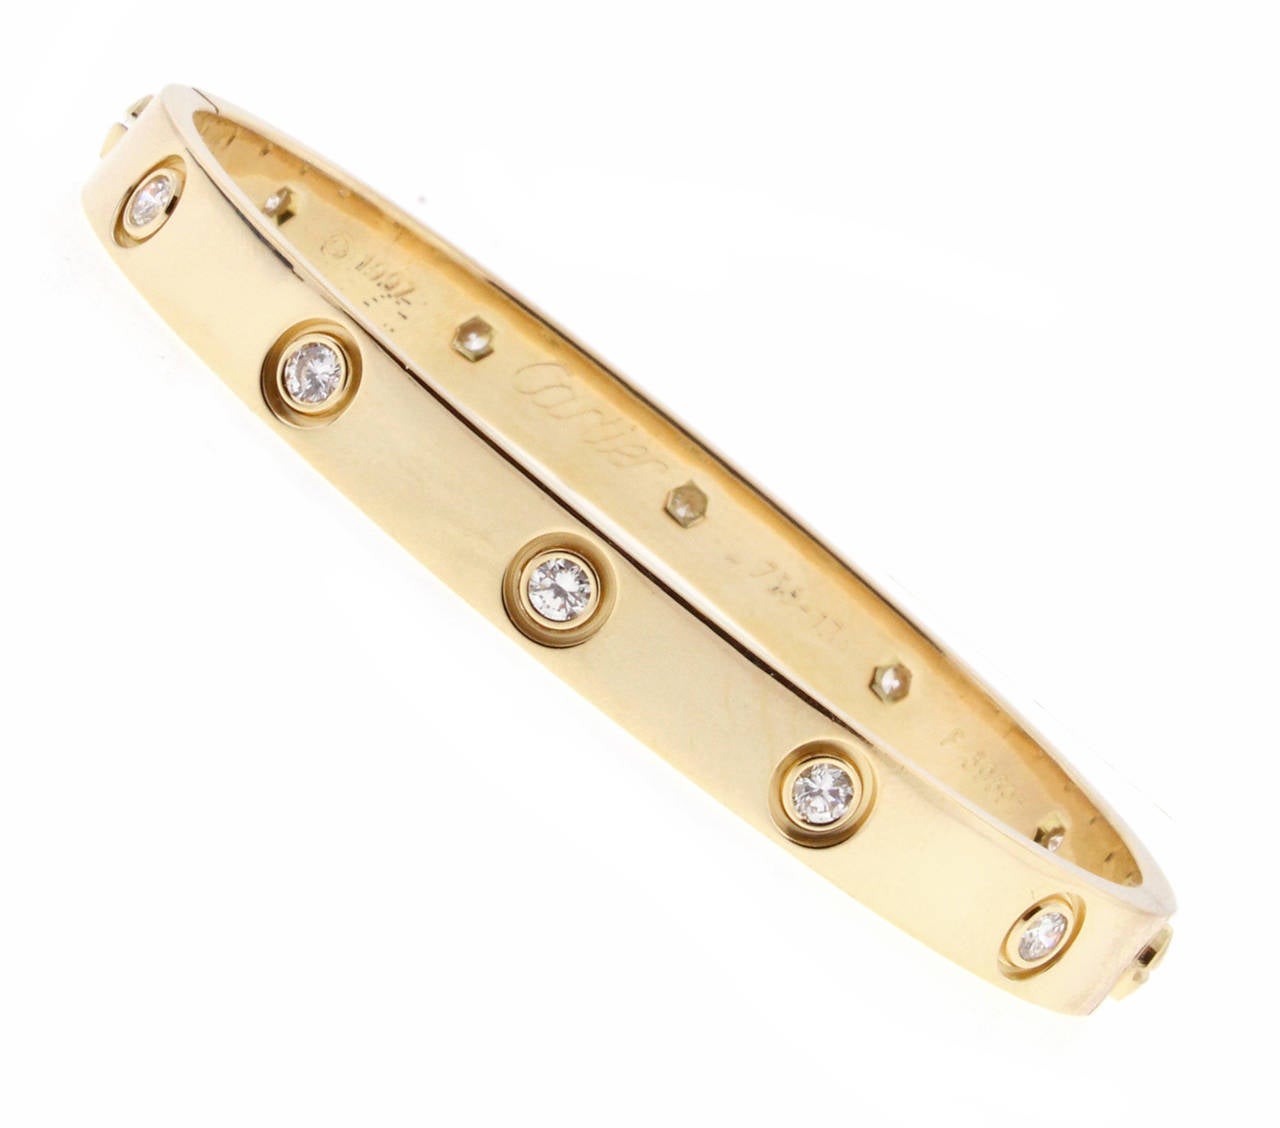 18 karat yellow gold Cartier Love bracelet, set with 10 Diamond weighing one carat.  The love bracelet remains an iconic symbol of love that transcends convention. Original screw design   Size 17